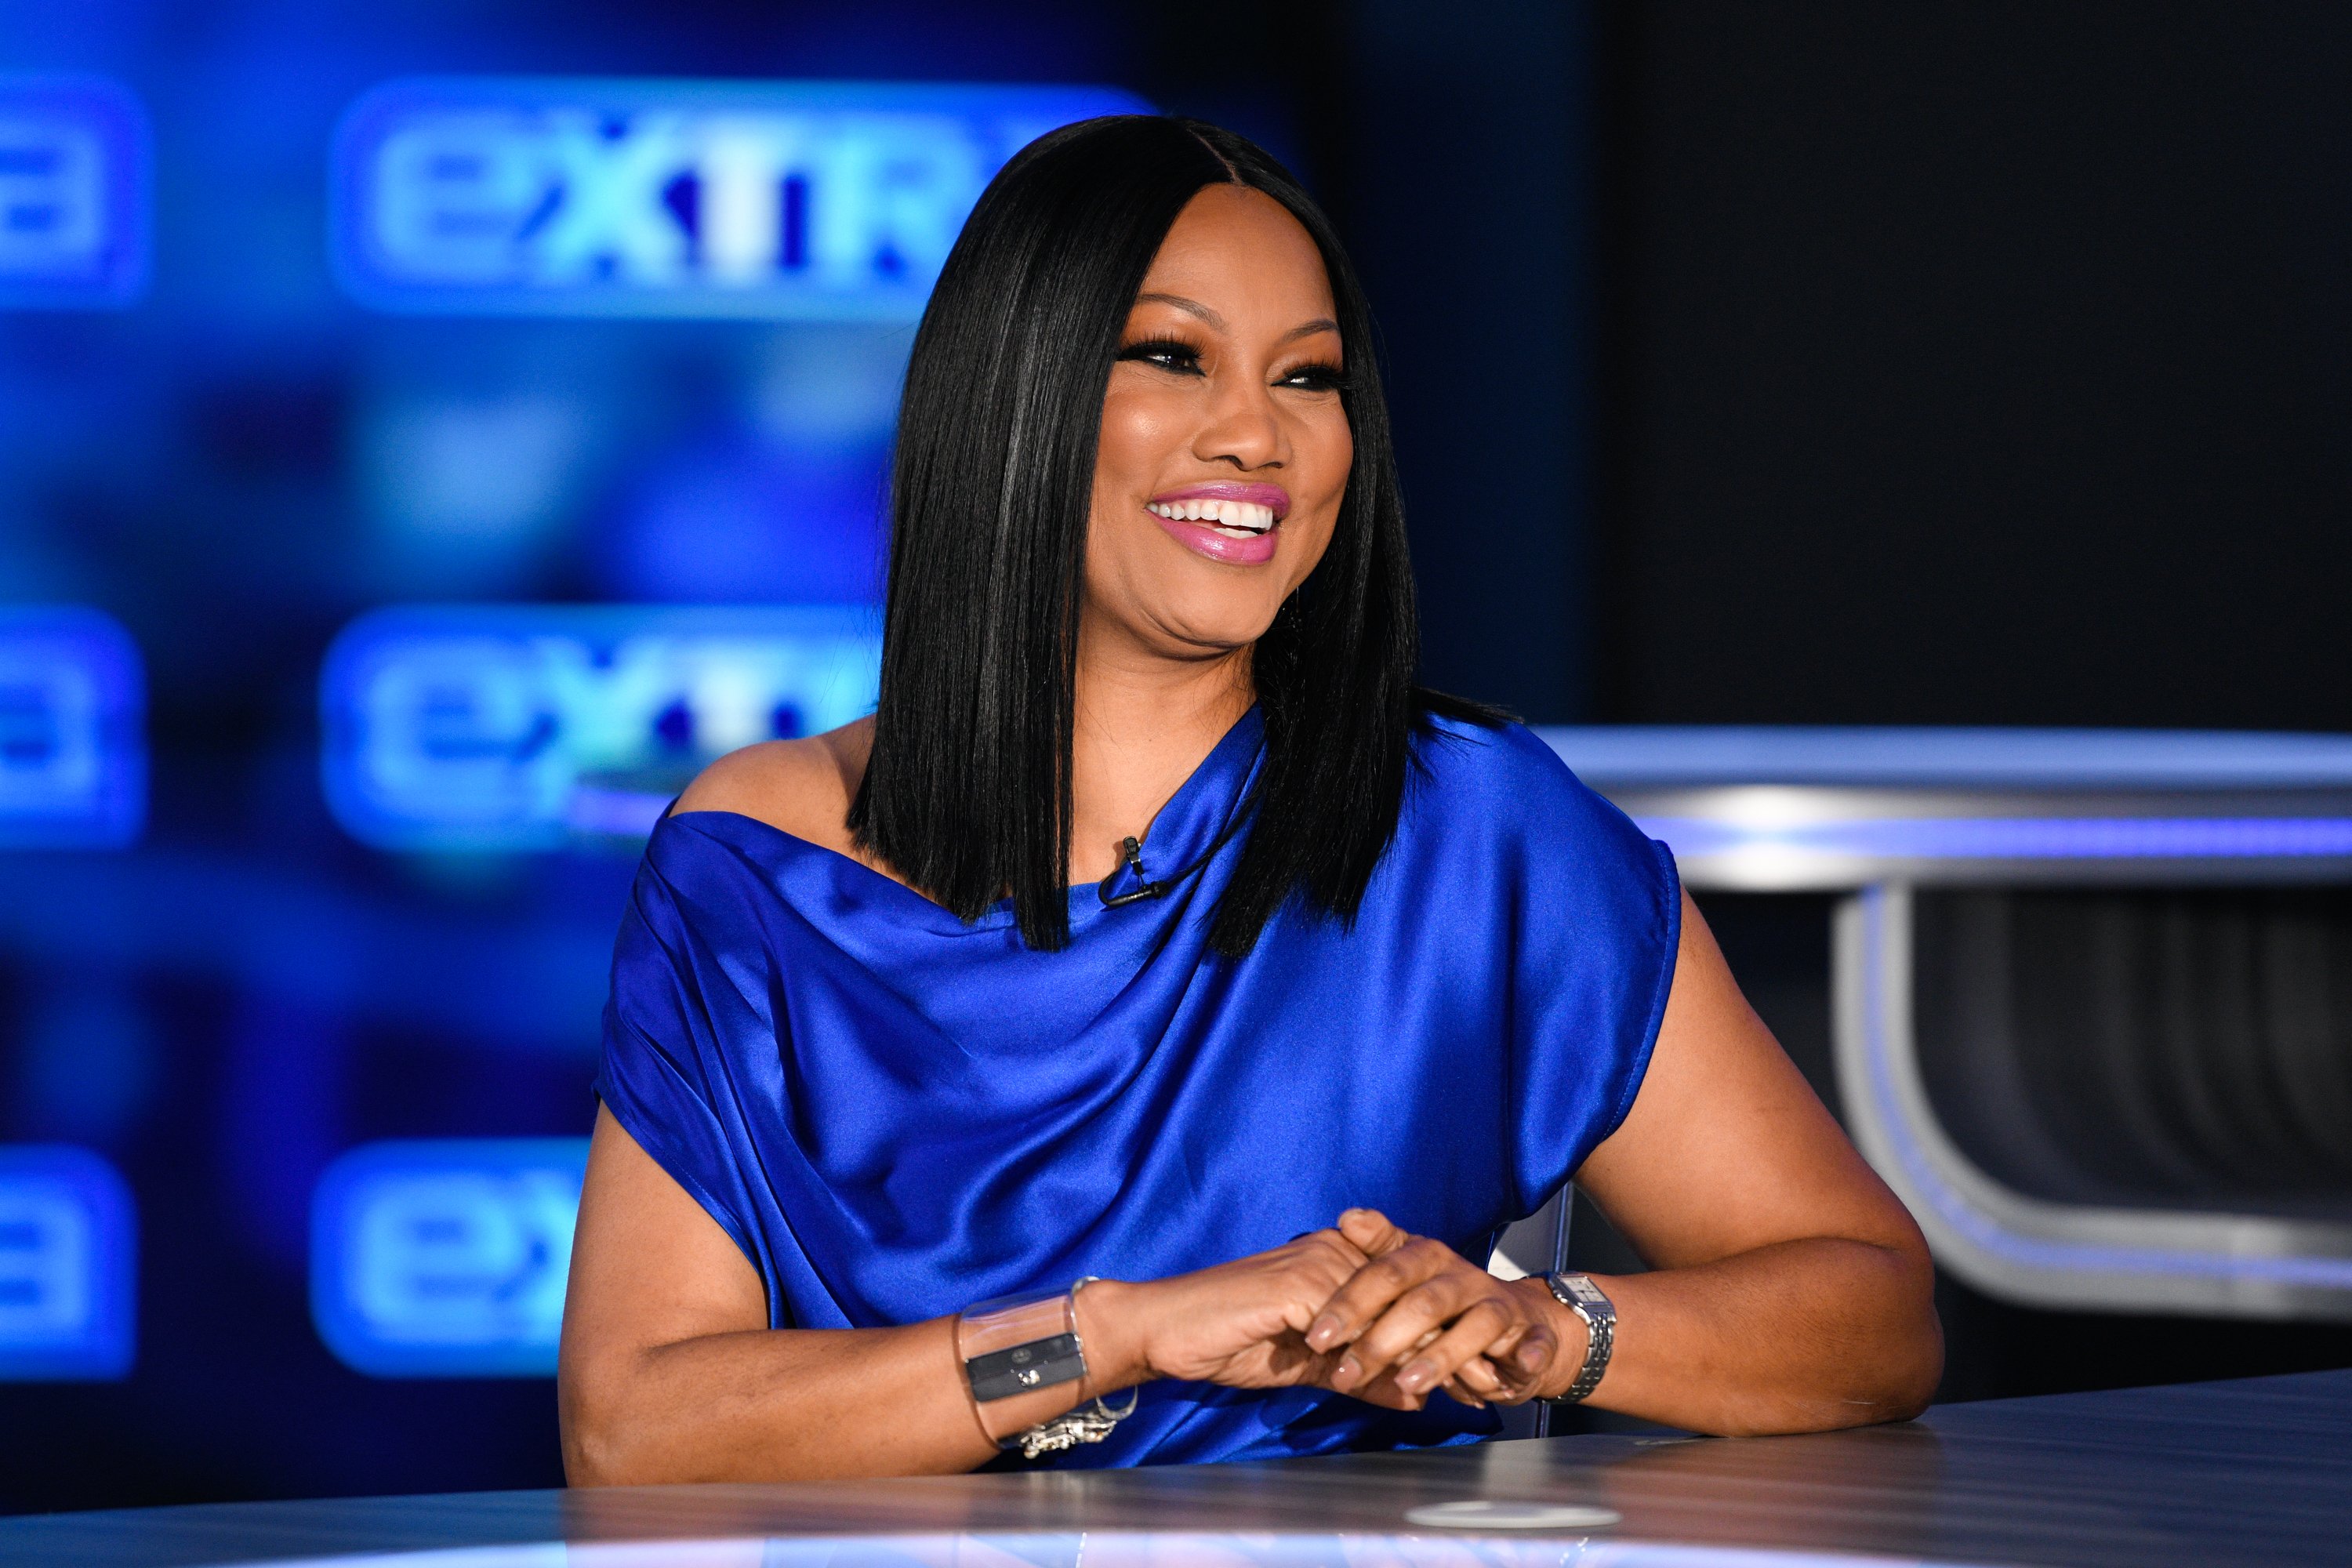 Garcelle Beauvais visits "Extra" on November 26, 2019 in Burbank, California. | Photo: Getty Images